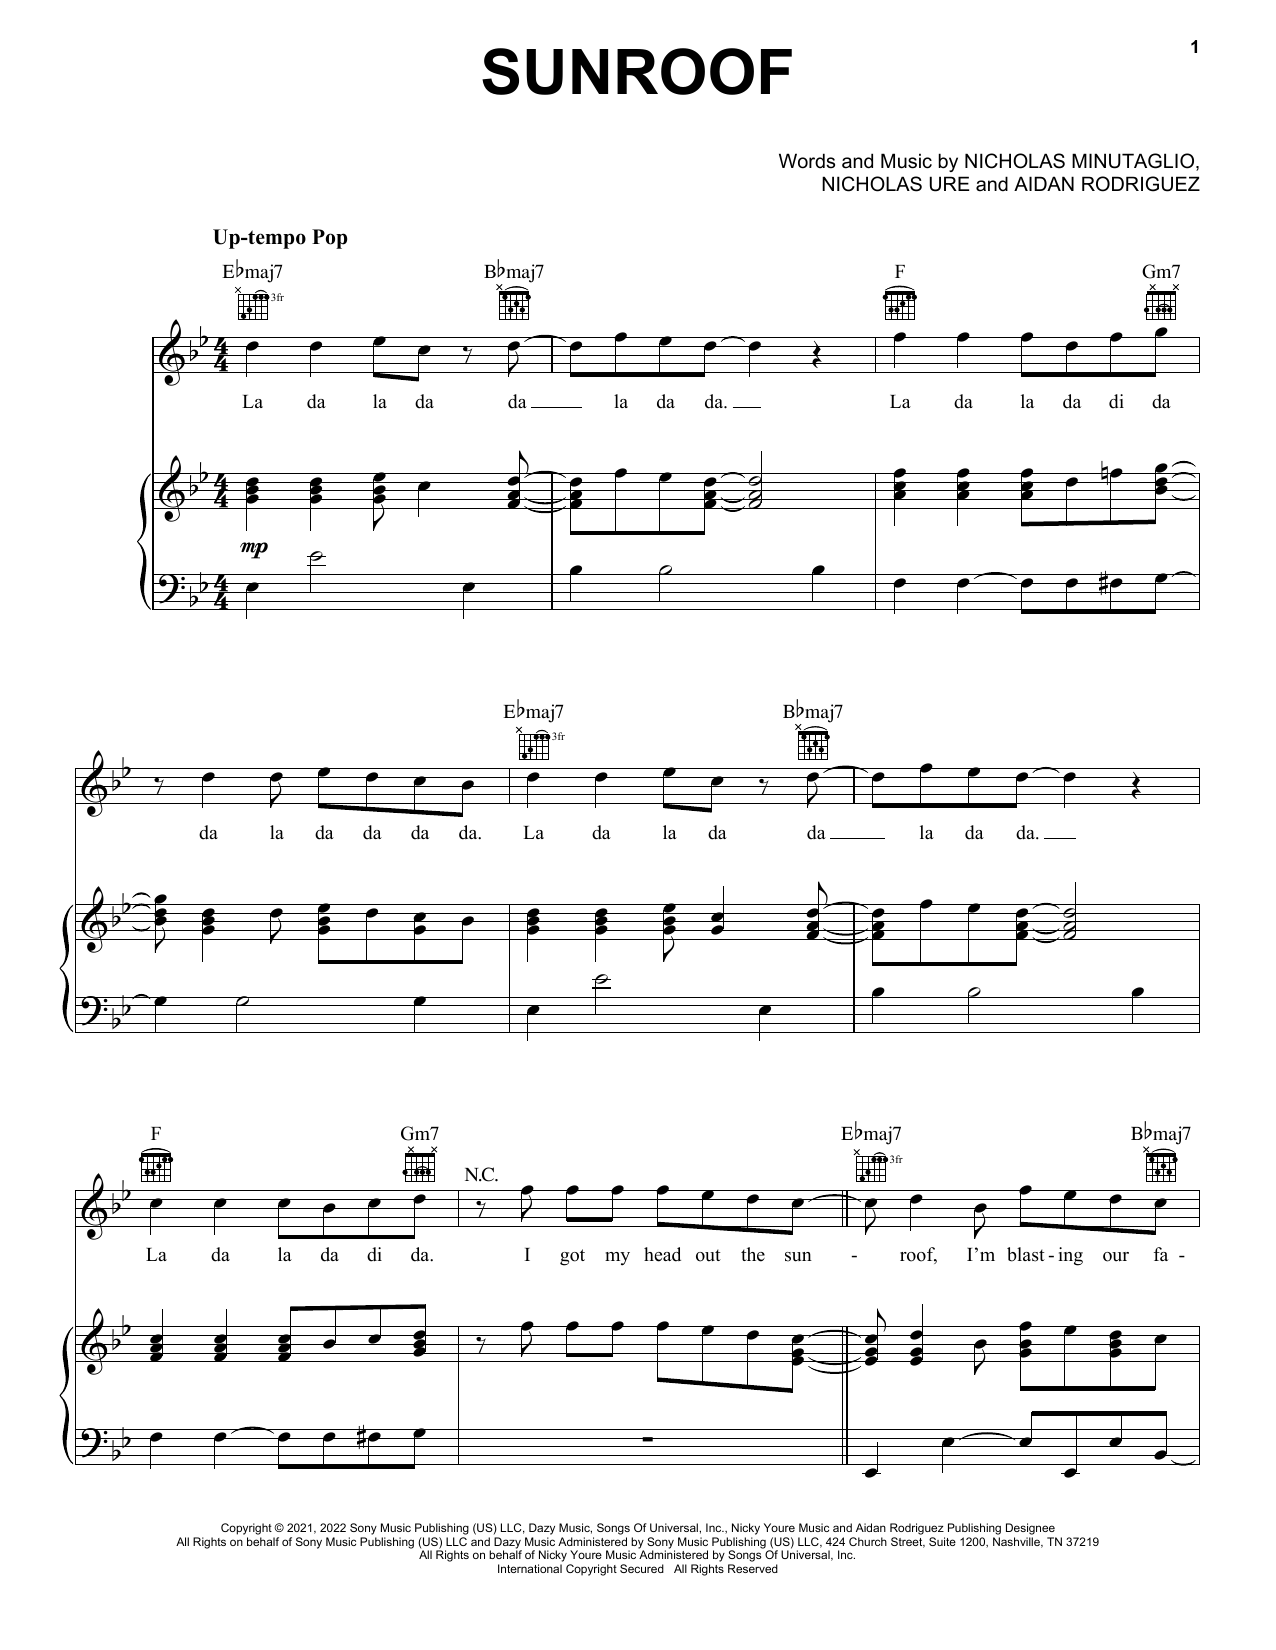 Sunroof Sheet Music by Nicky Youre & dazy for Piano/Keyboard and Voice ...